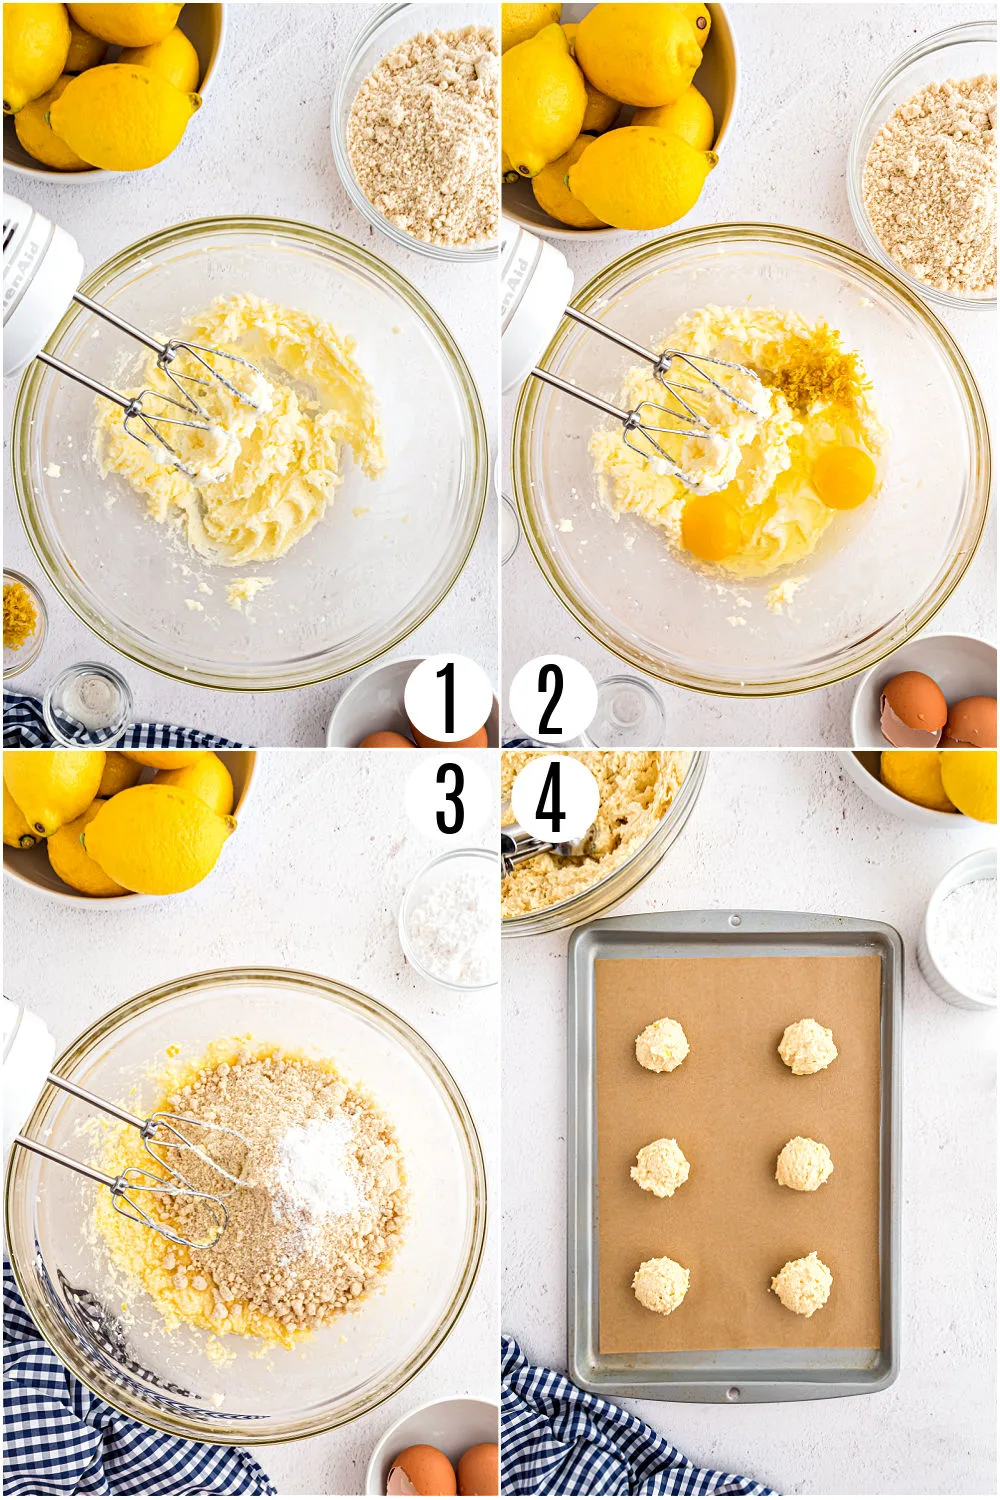 Step by step photos showing how to make sugar free lemon cookies.